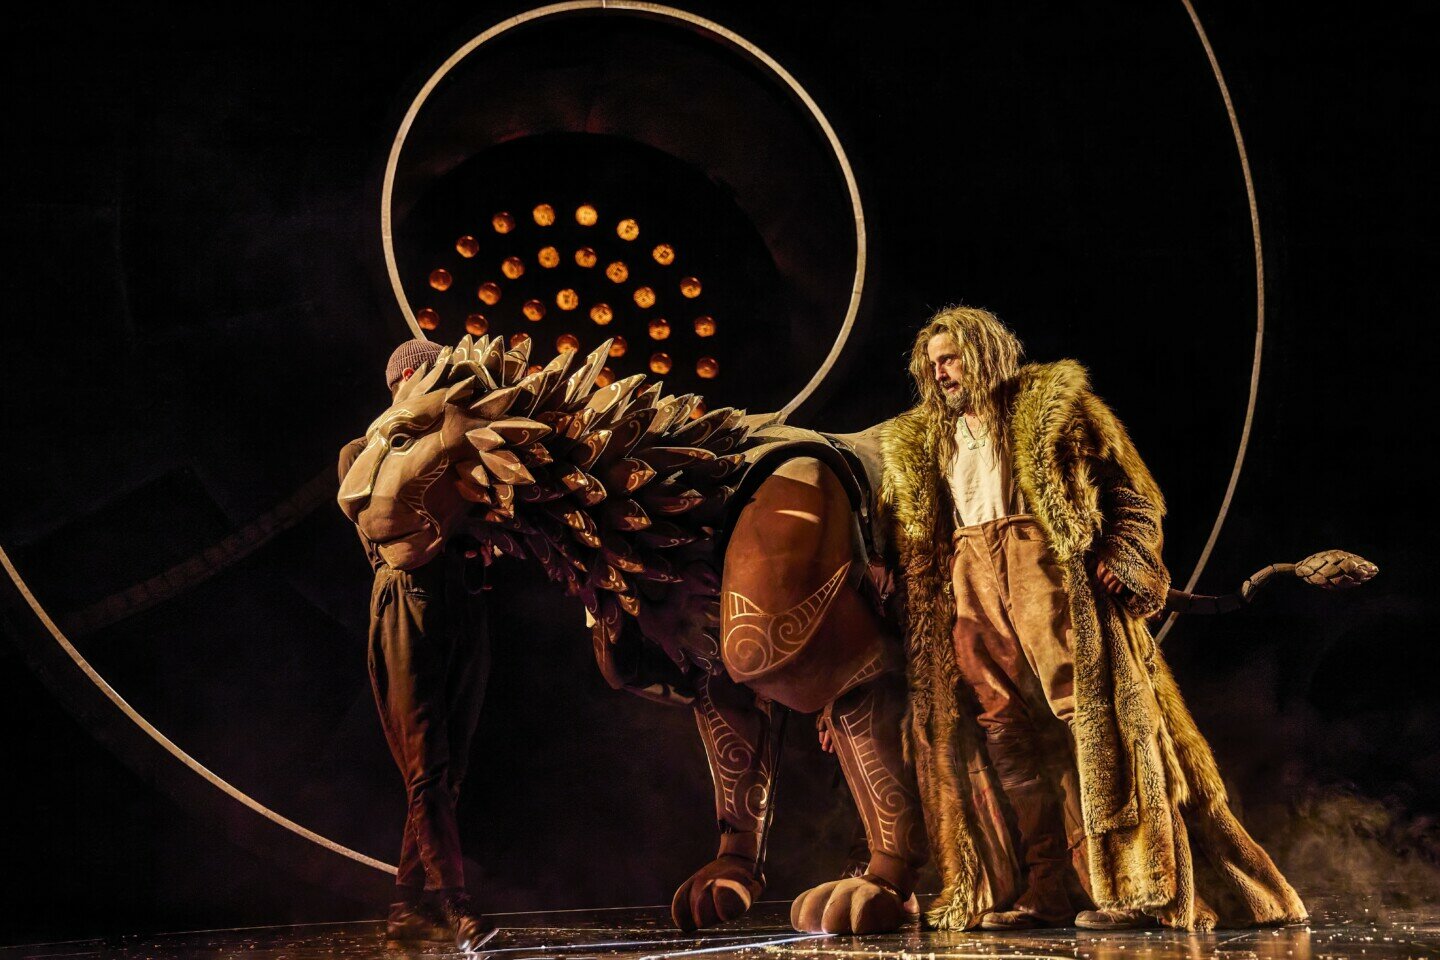 Review of ‘The Lion, the Witch and the Wardrobe’ at the Gillian Lynne Theatre